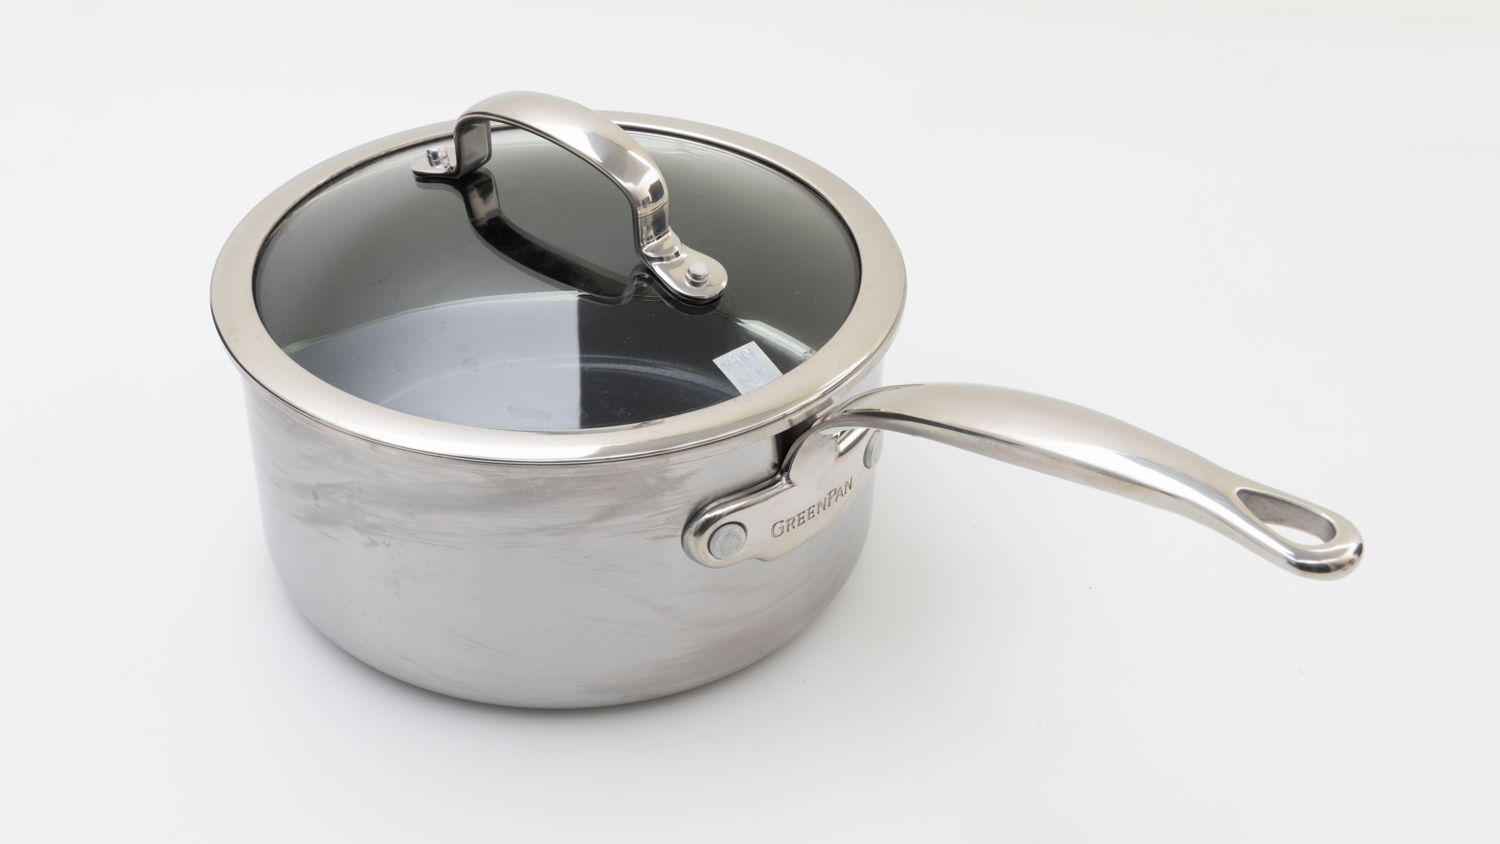 Green Pan Premiere Saucepan with Lid, Stainless Steel 20cm carousel image